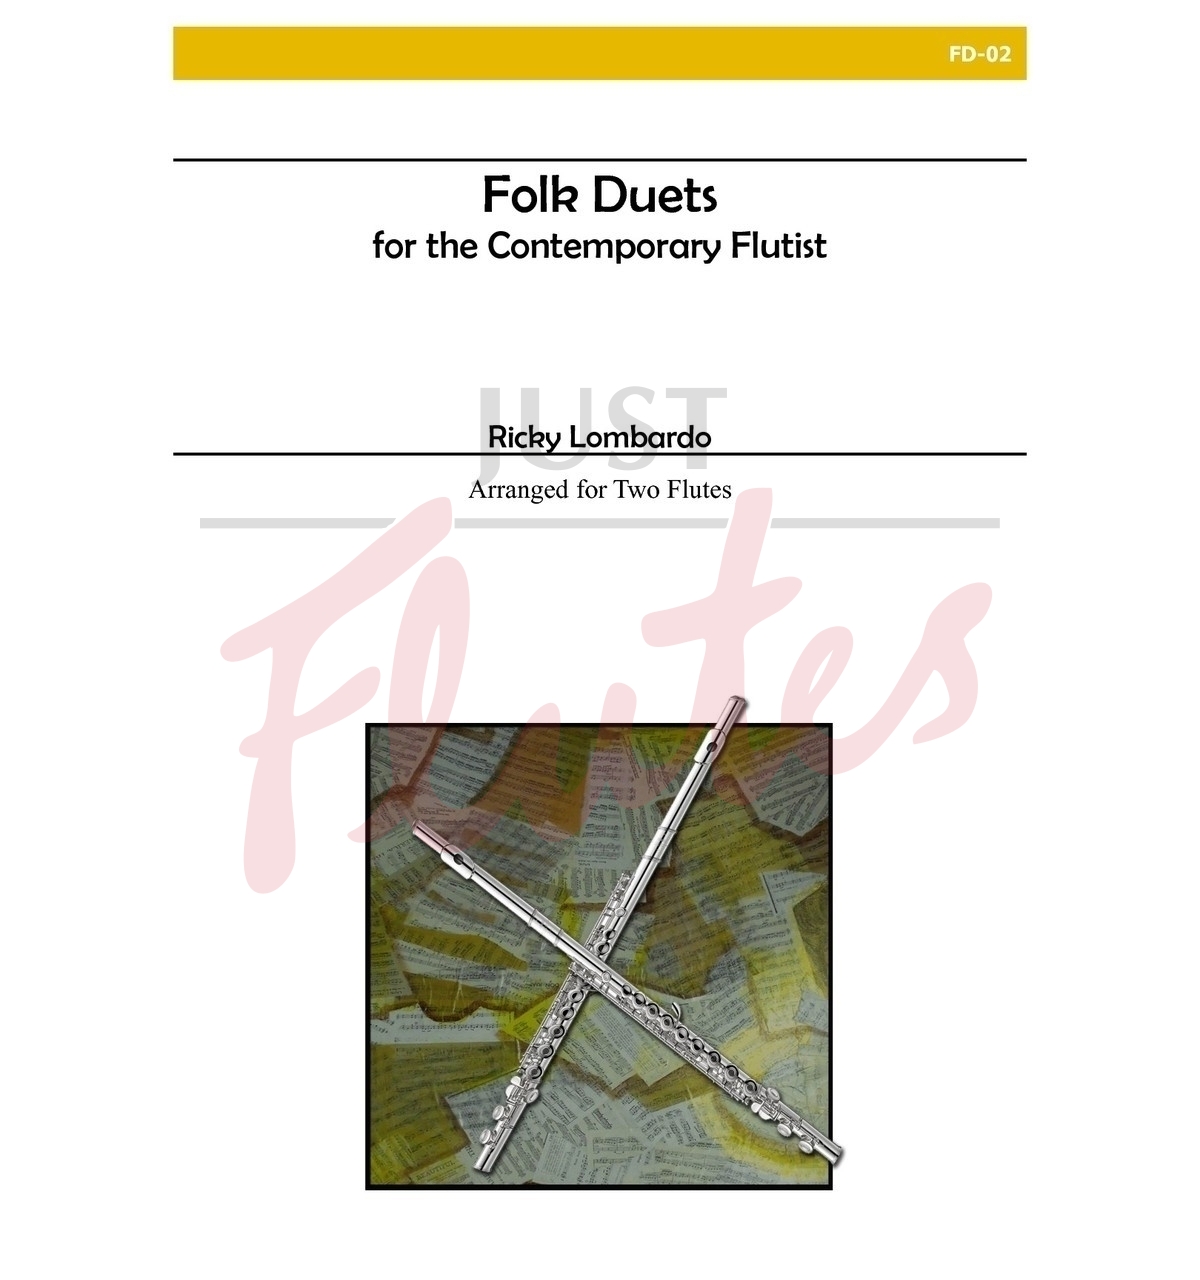 Folk Duets for the Contemporary Flutist